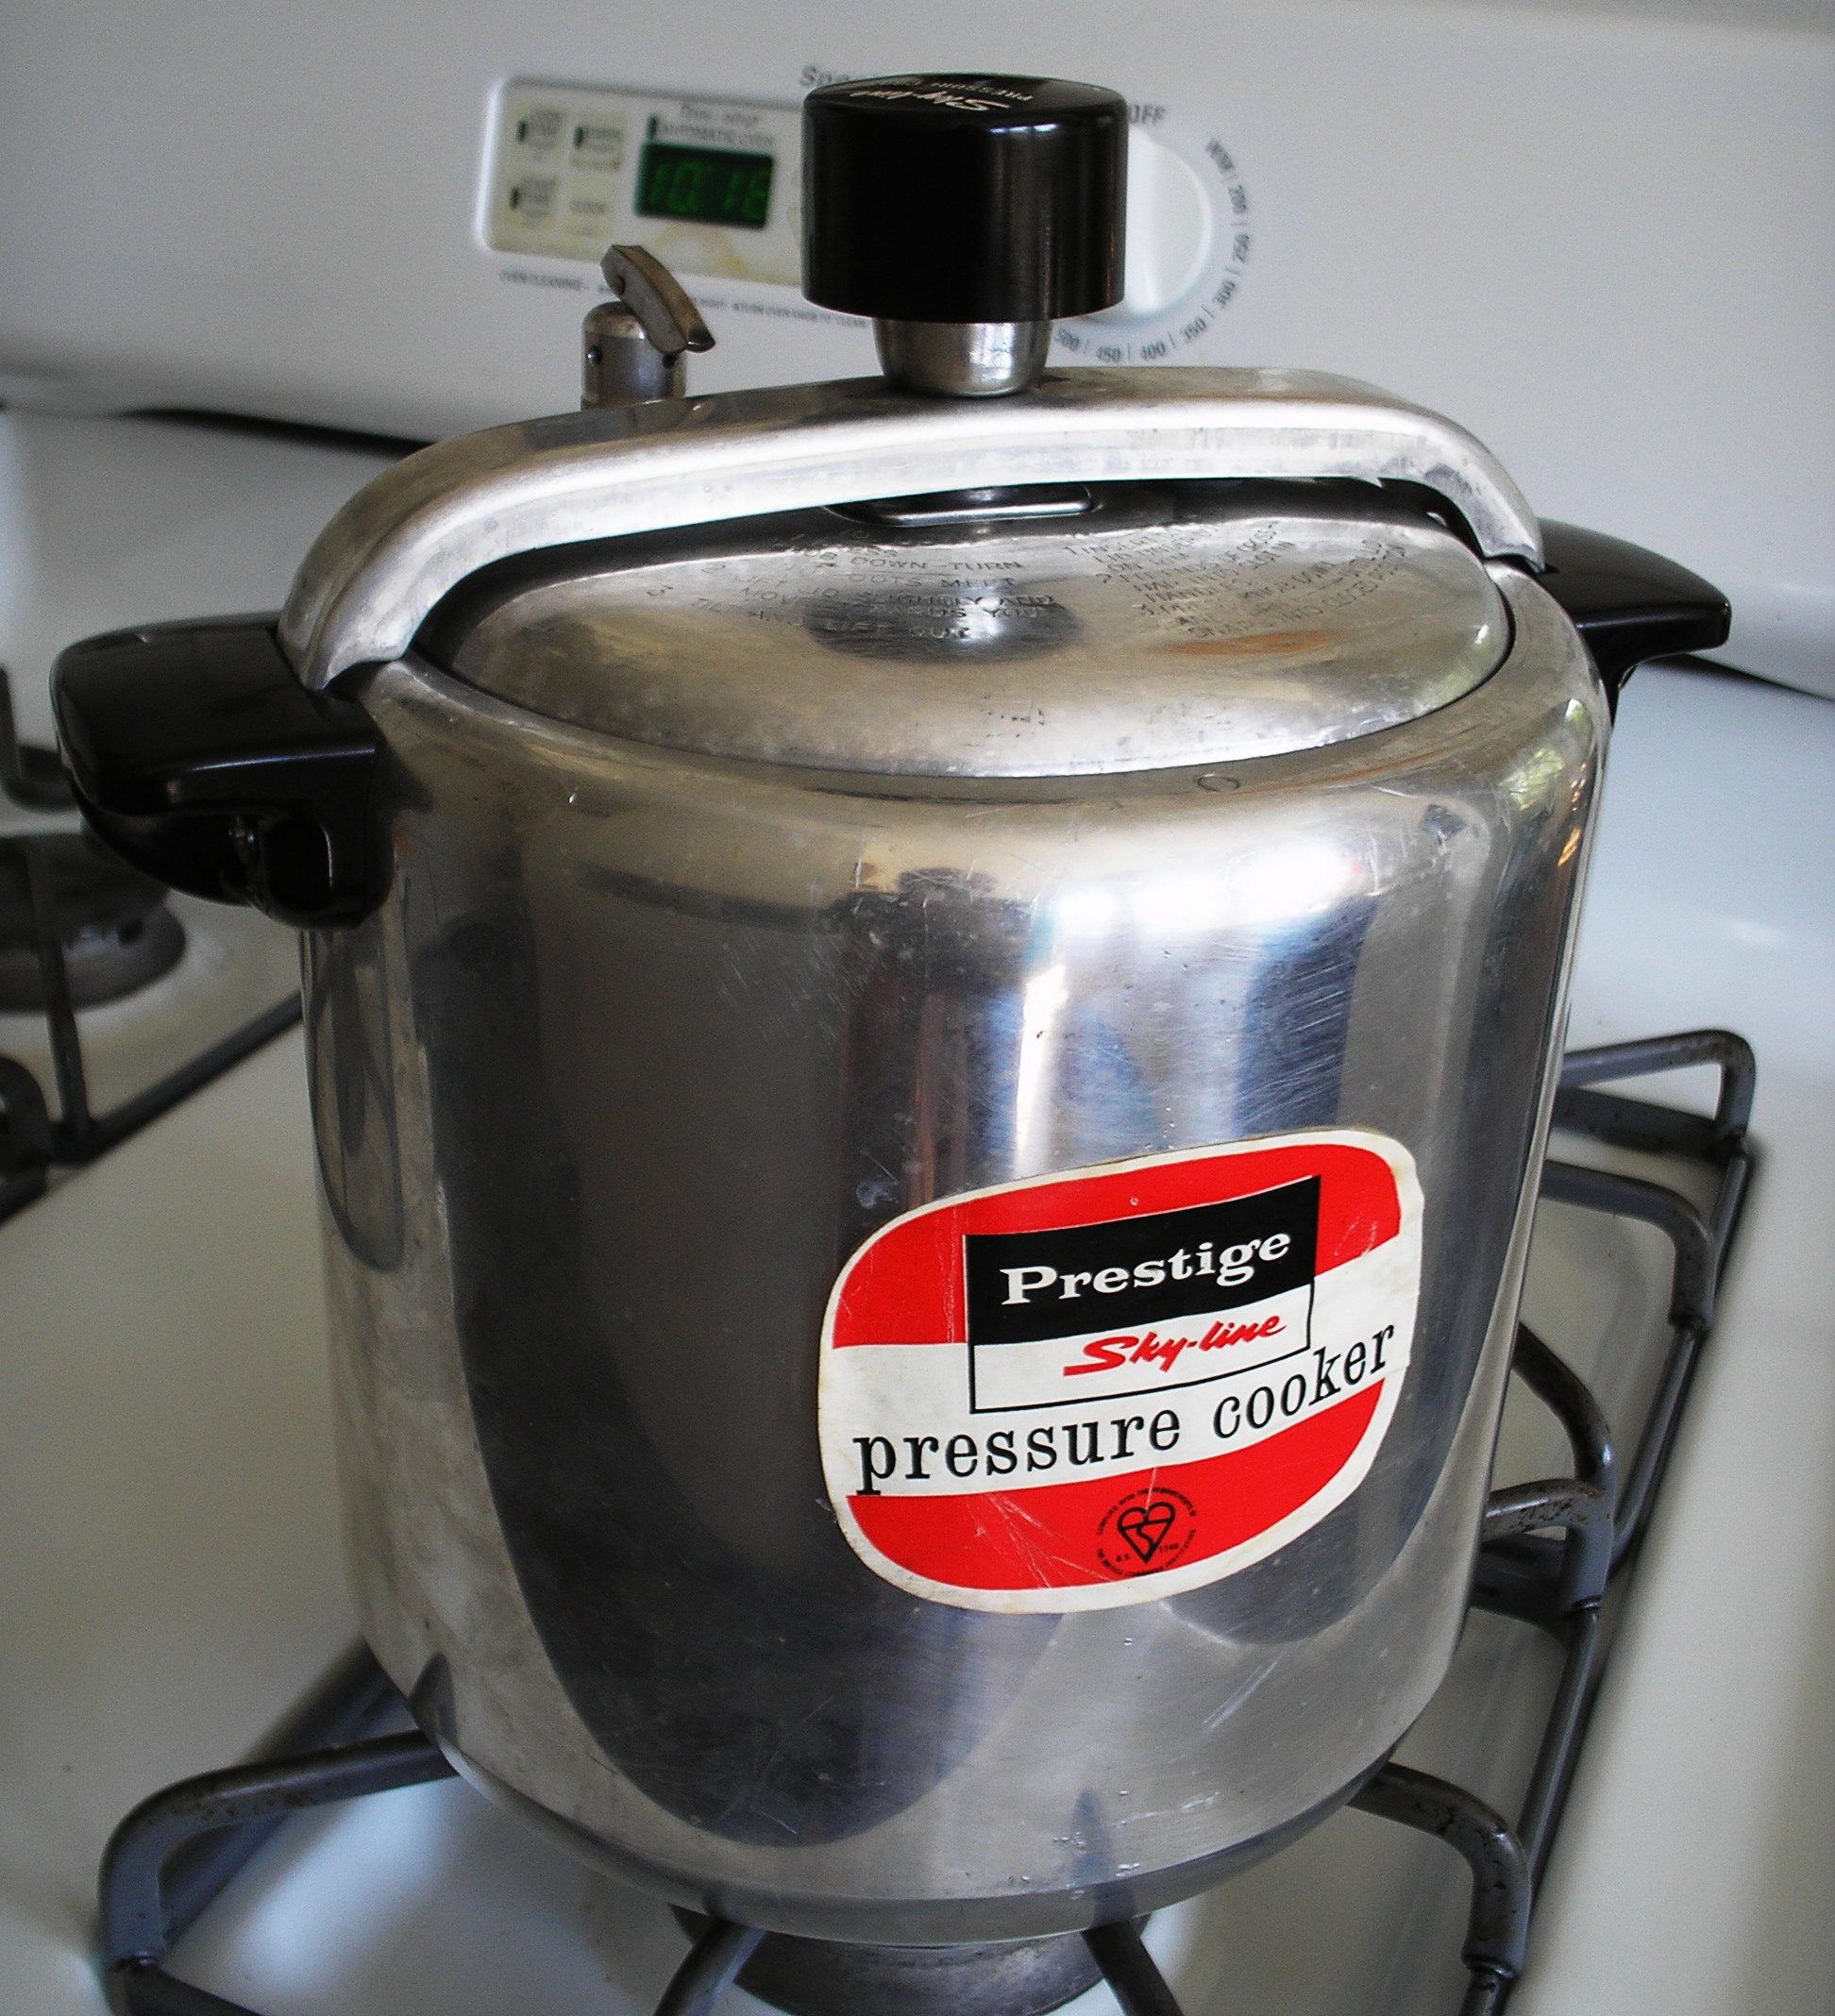 Our pressure cooker was a Prestige Skyline, very popular in the 1950s 